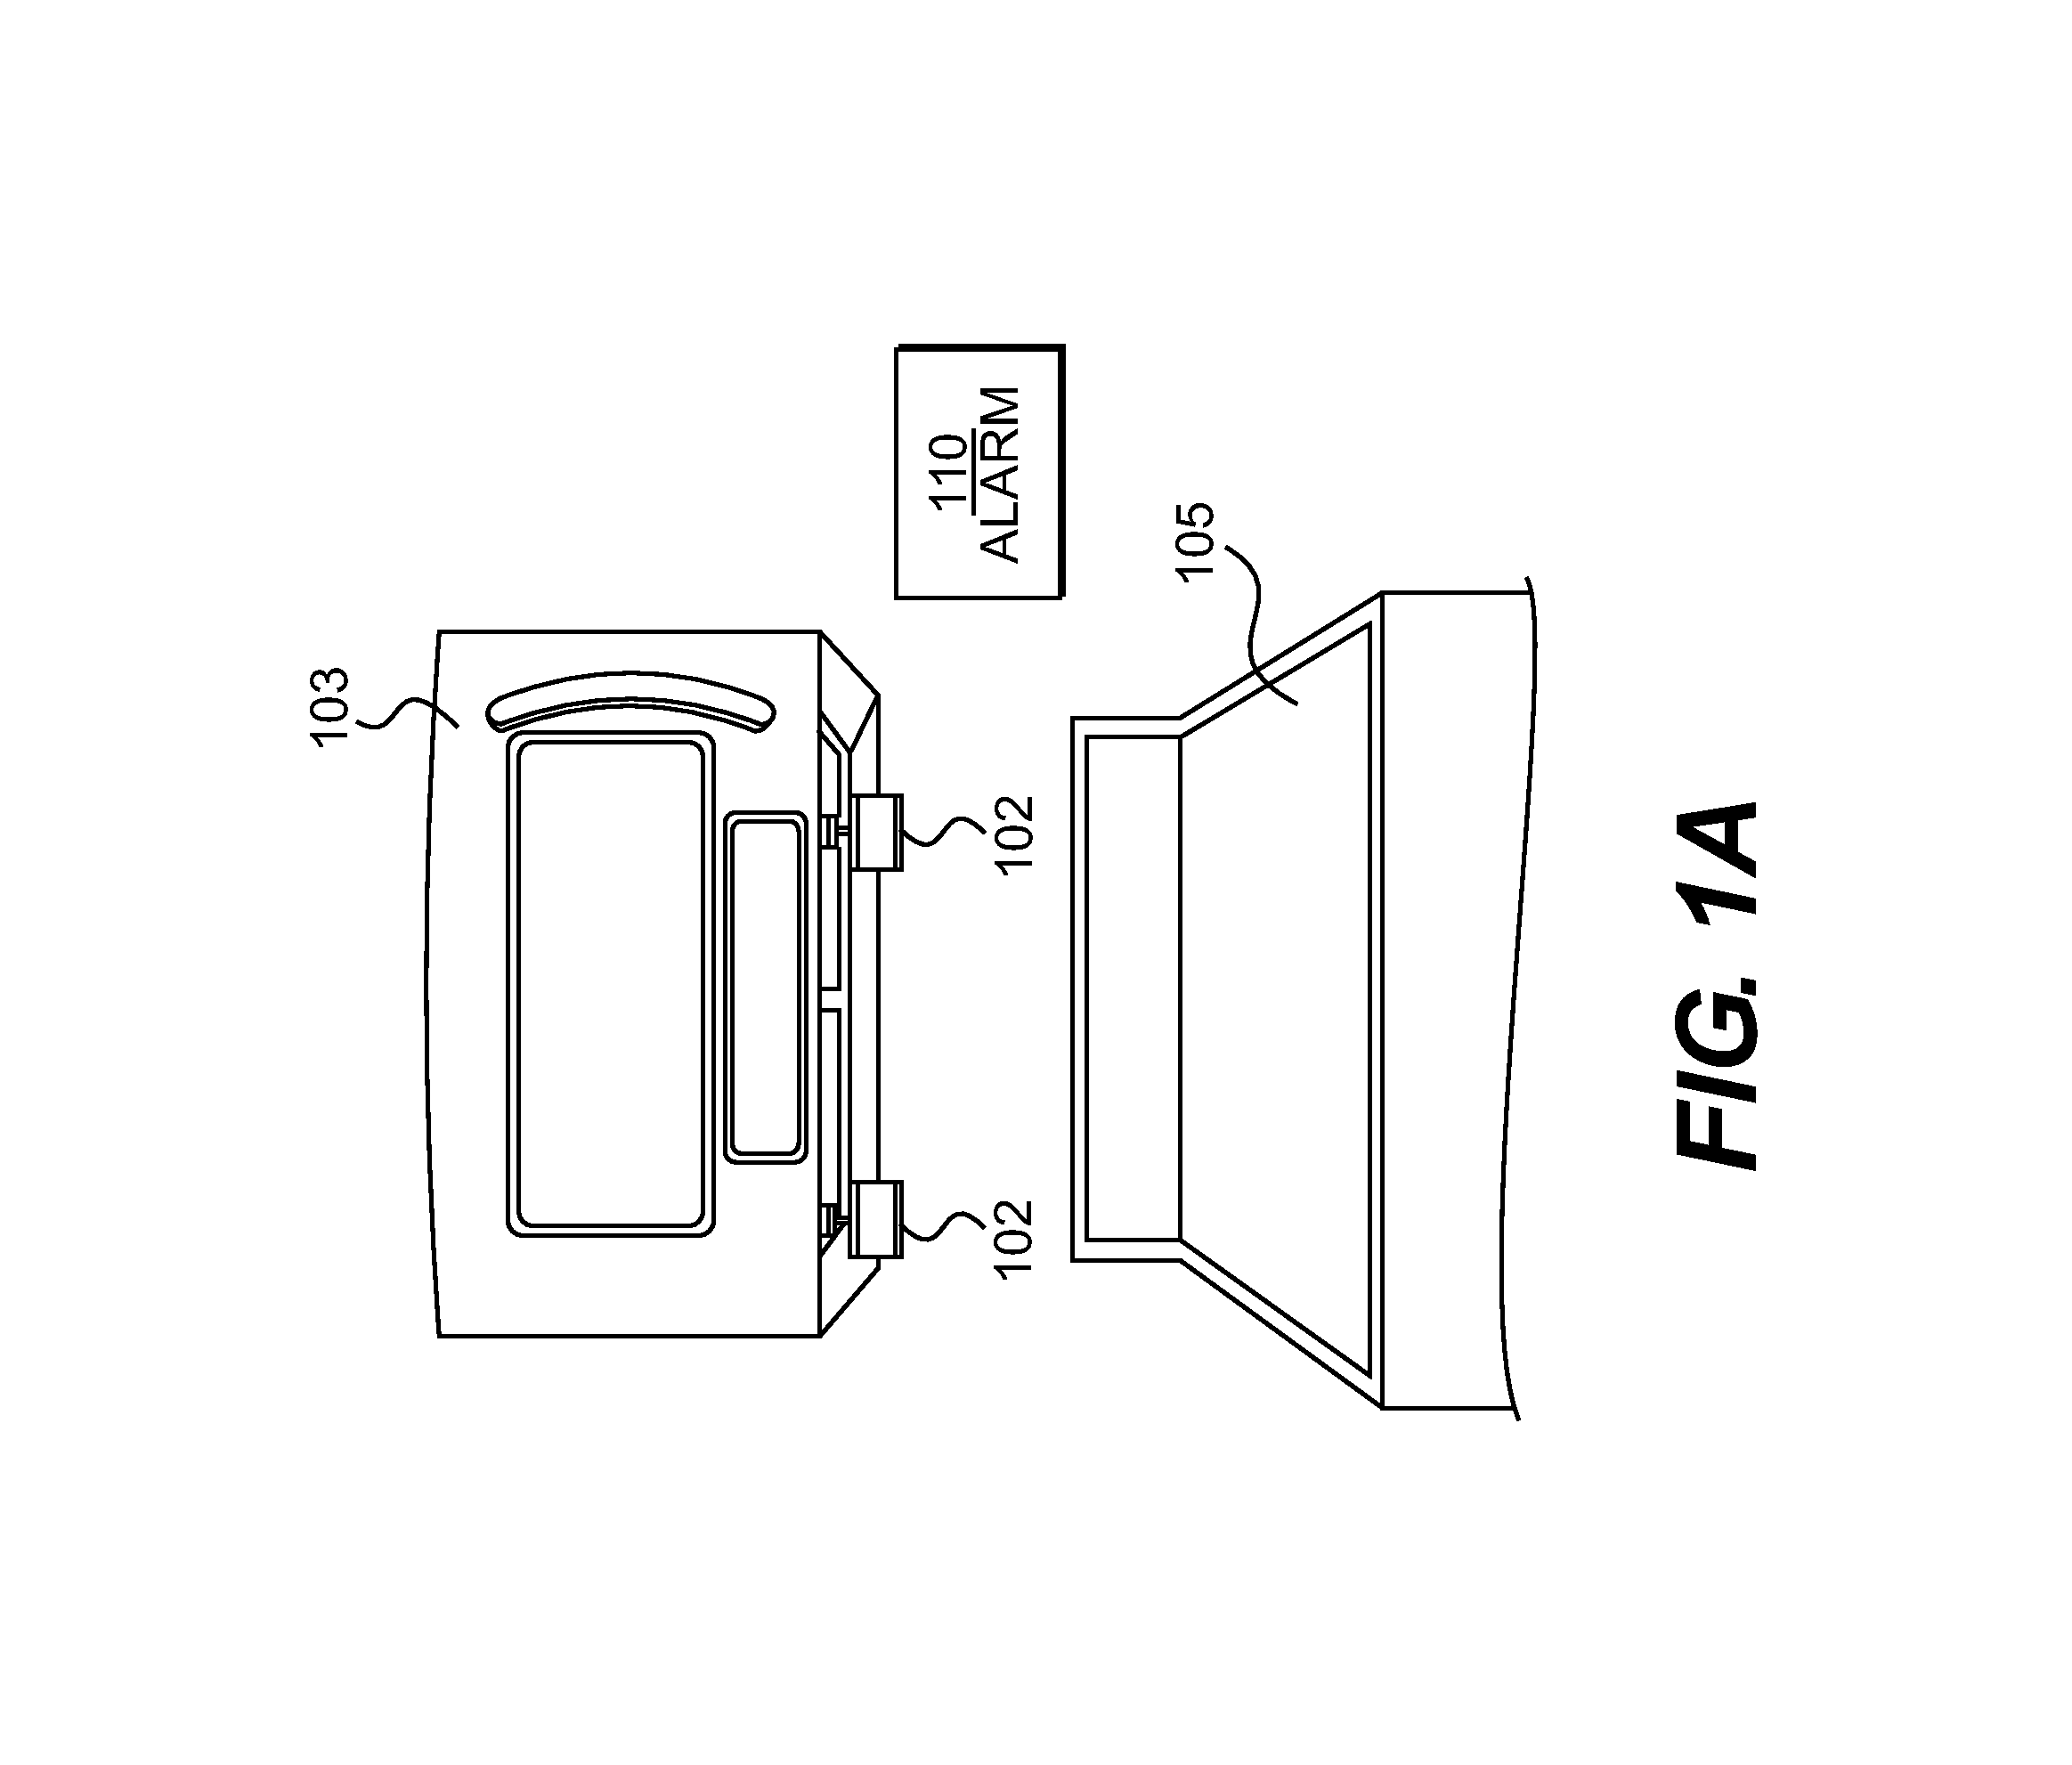 Sound based fire alarm system and method